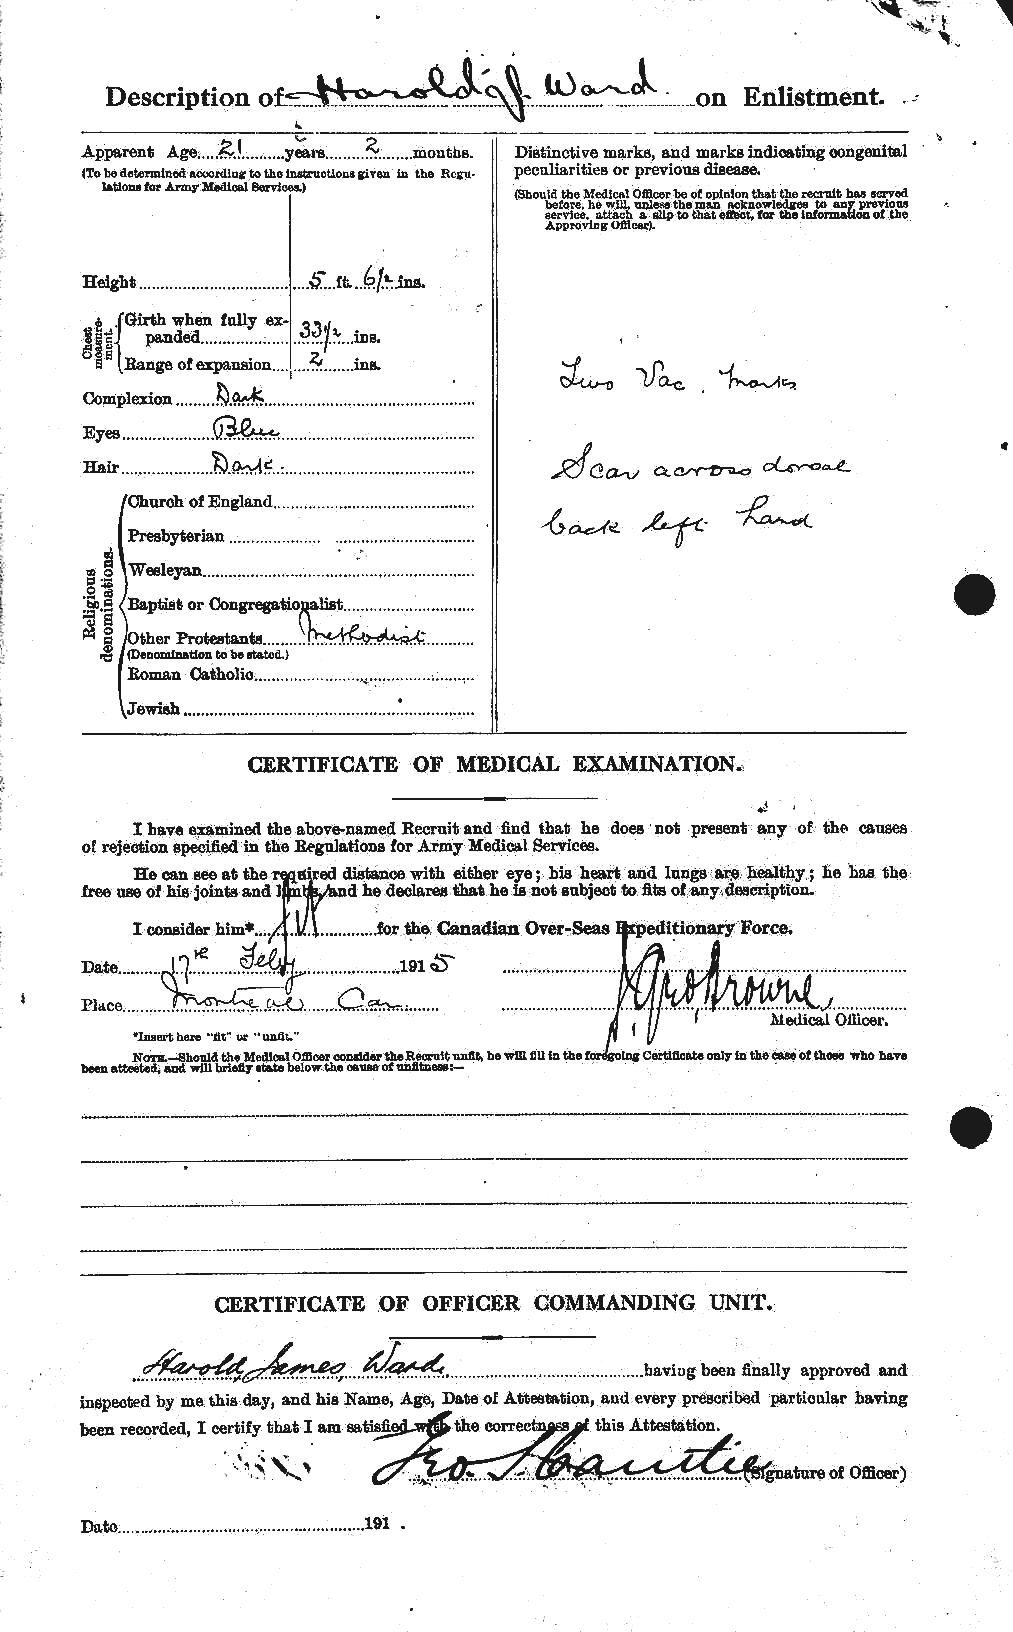 Personnel Records of the First World War - CEF 657802b